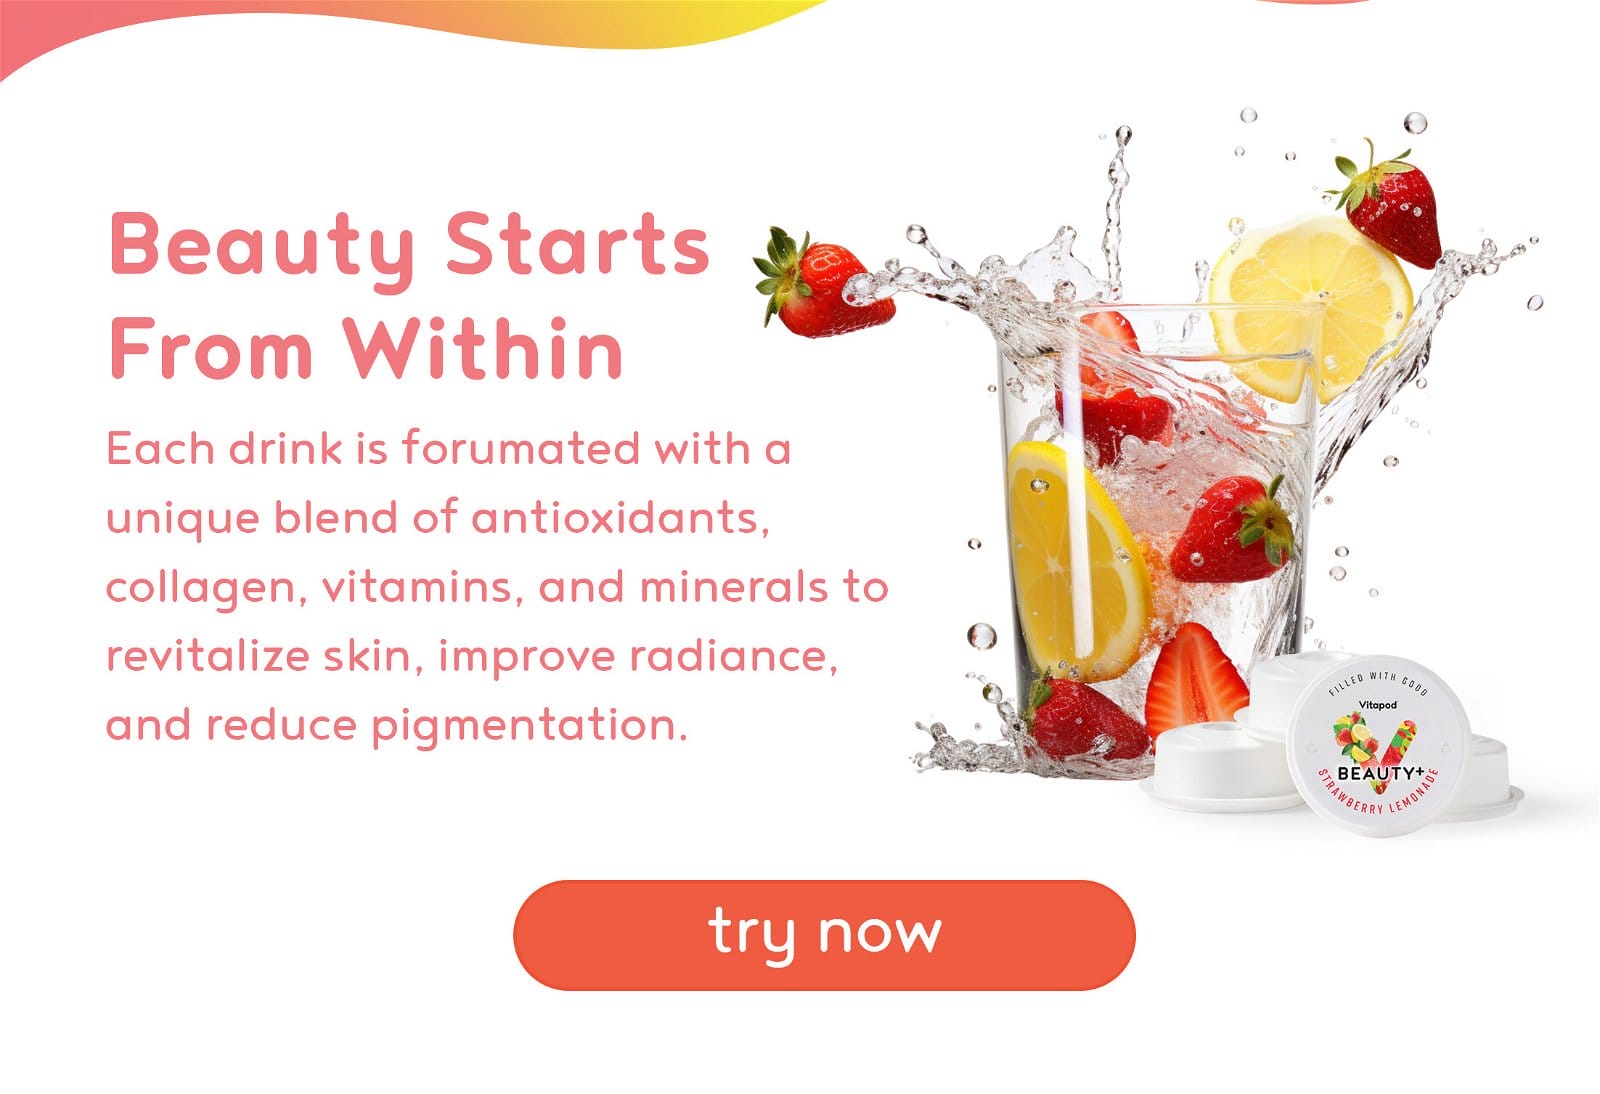 Beauty Starts From Within: Each drink is forumated with a unique blend of antioxidants, collagen, vitamins, and minerals to revitalize skin, improve radiance, and reduce pigmentation.